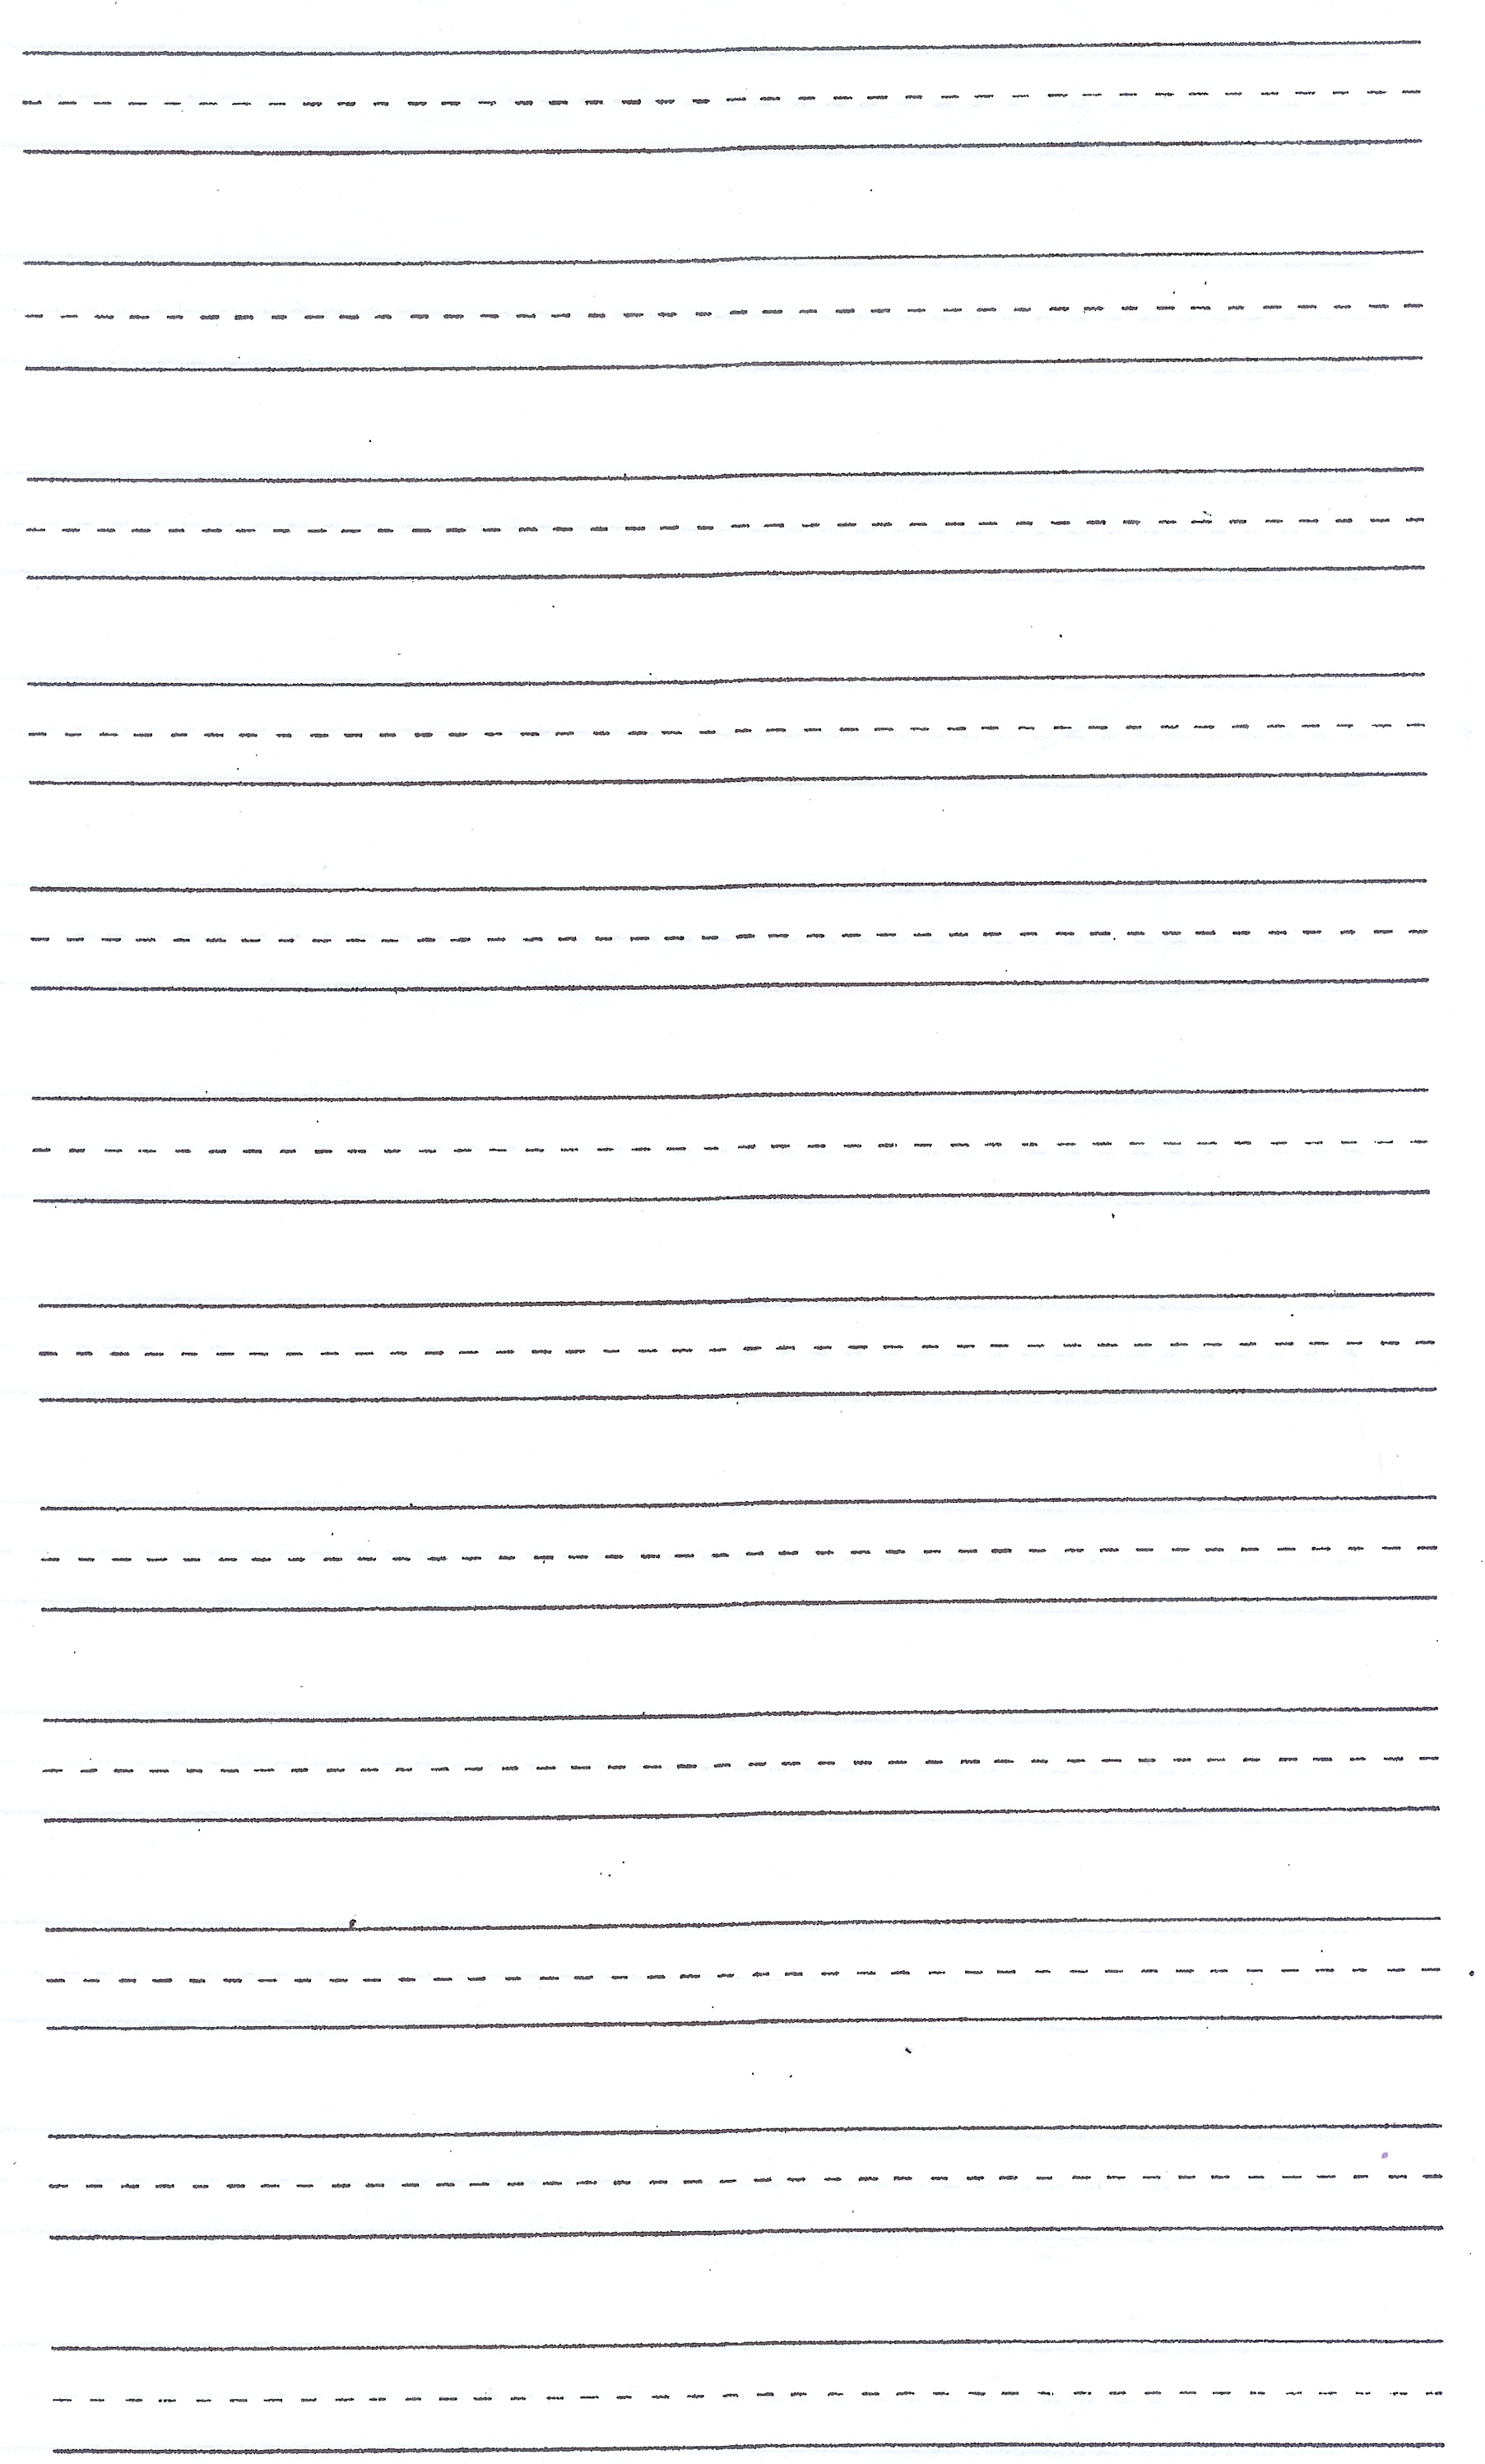 6-best-images-of-first-grade-writing-paper-printable-printable-first-grade-writing-paper